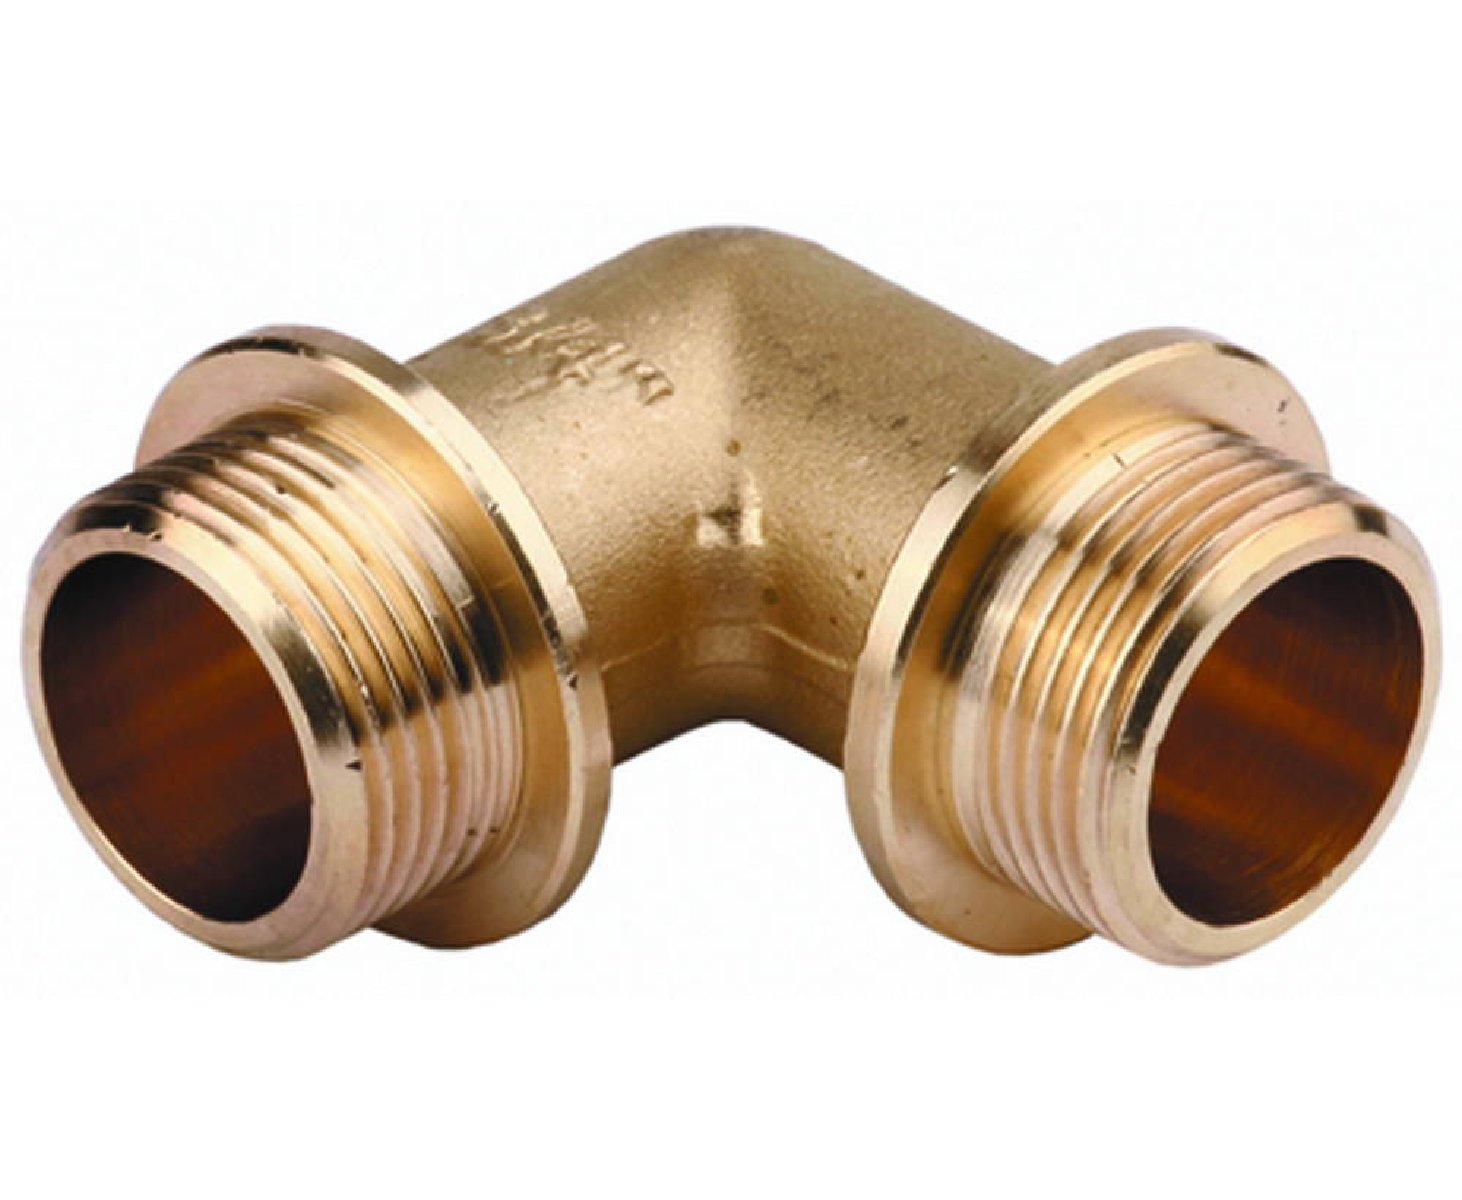  GENERAL FITTINGS   3 4  (51071-S S-3 4)